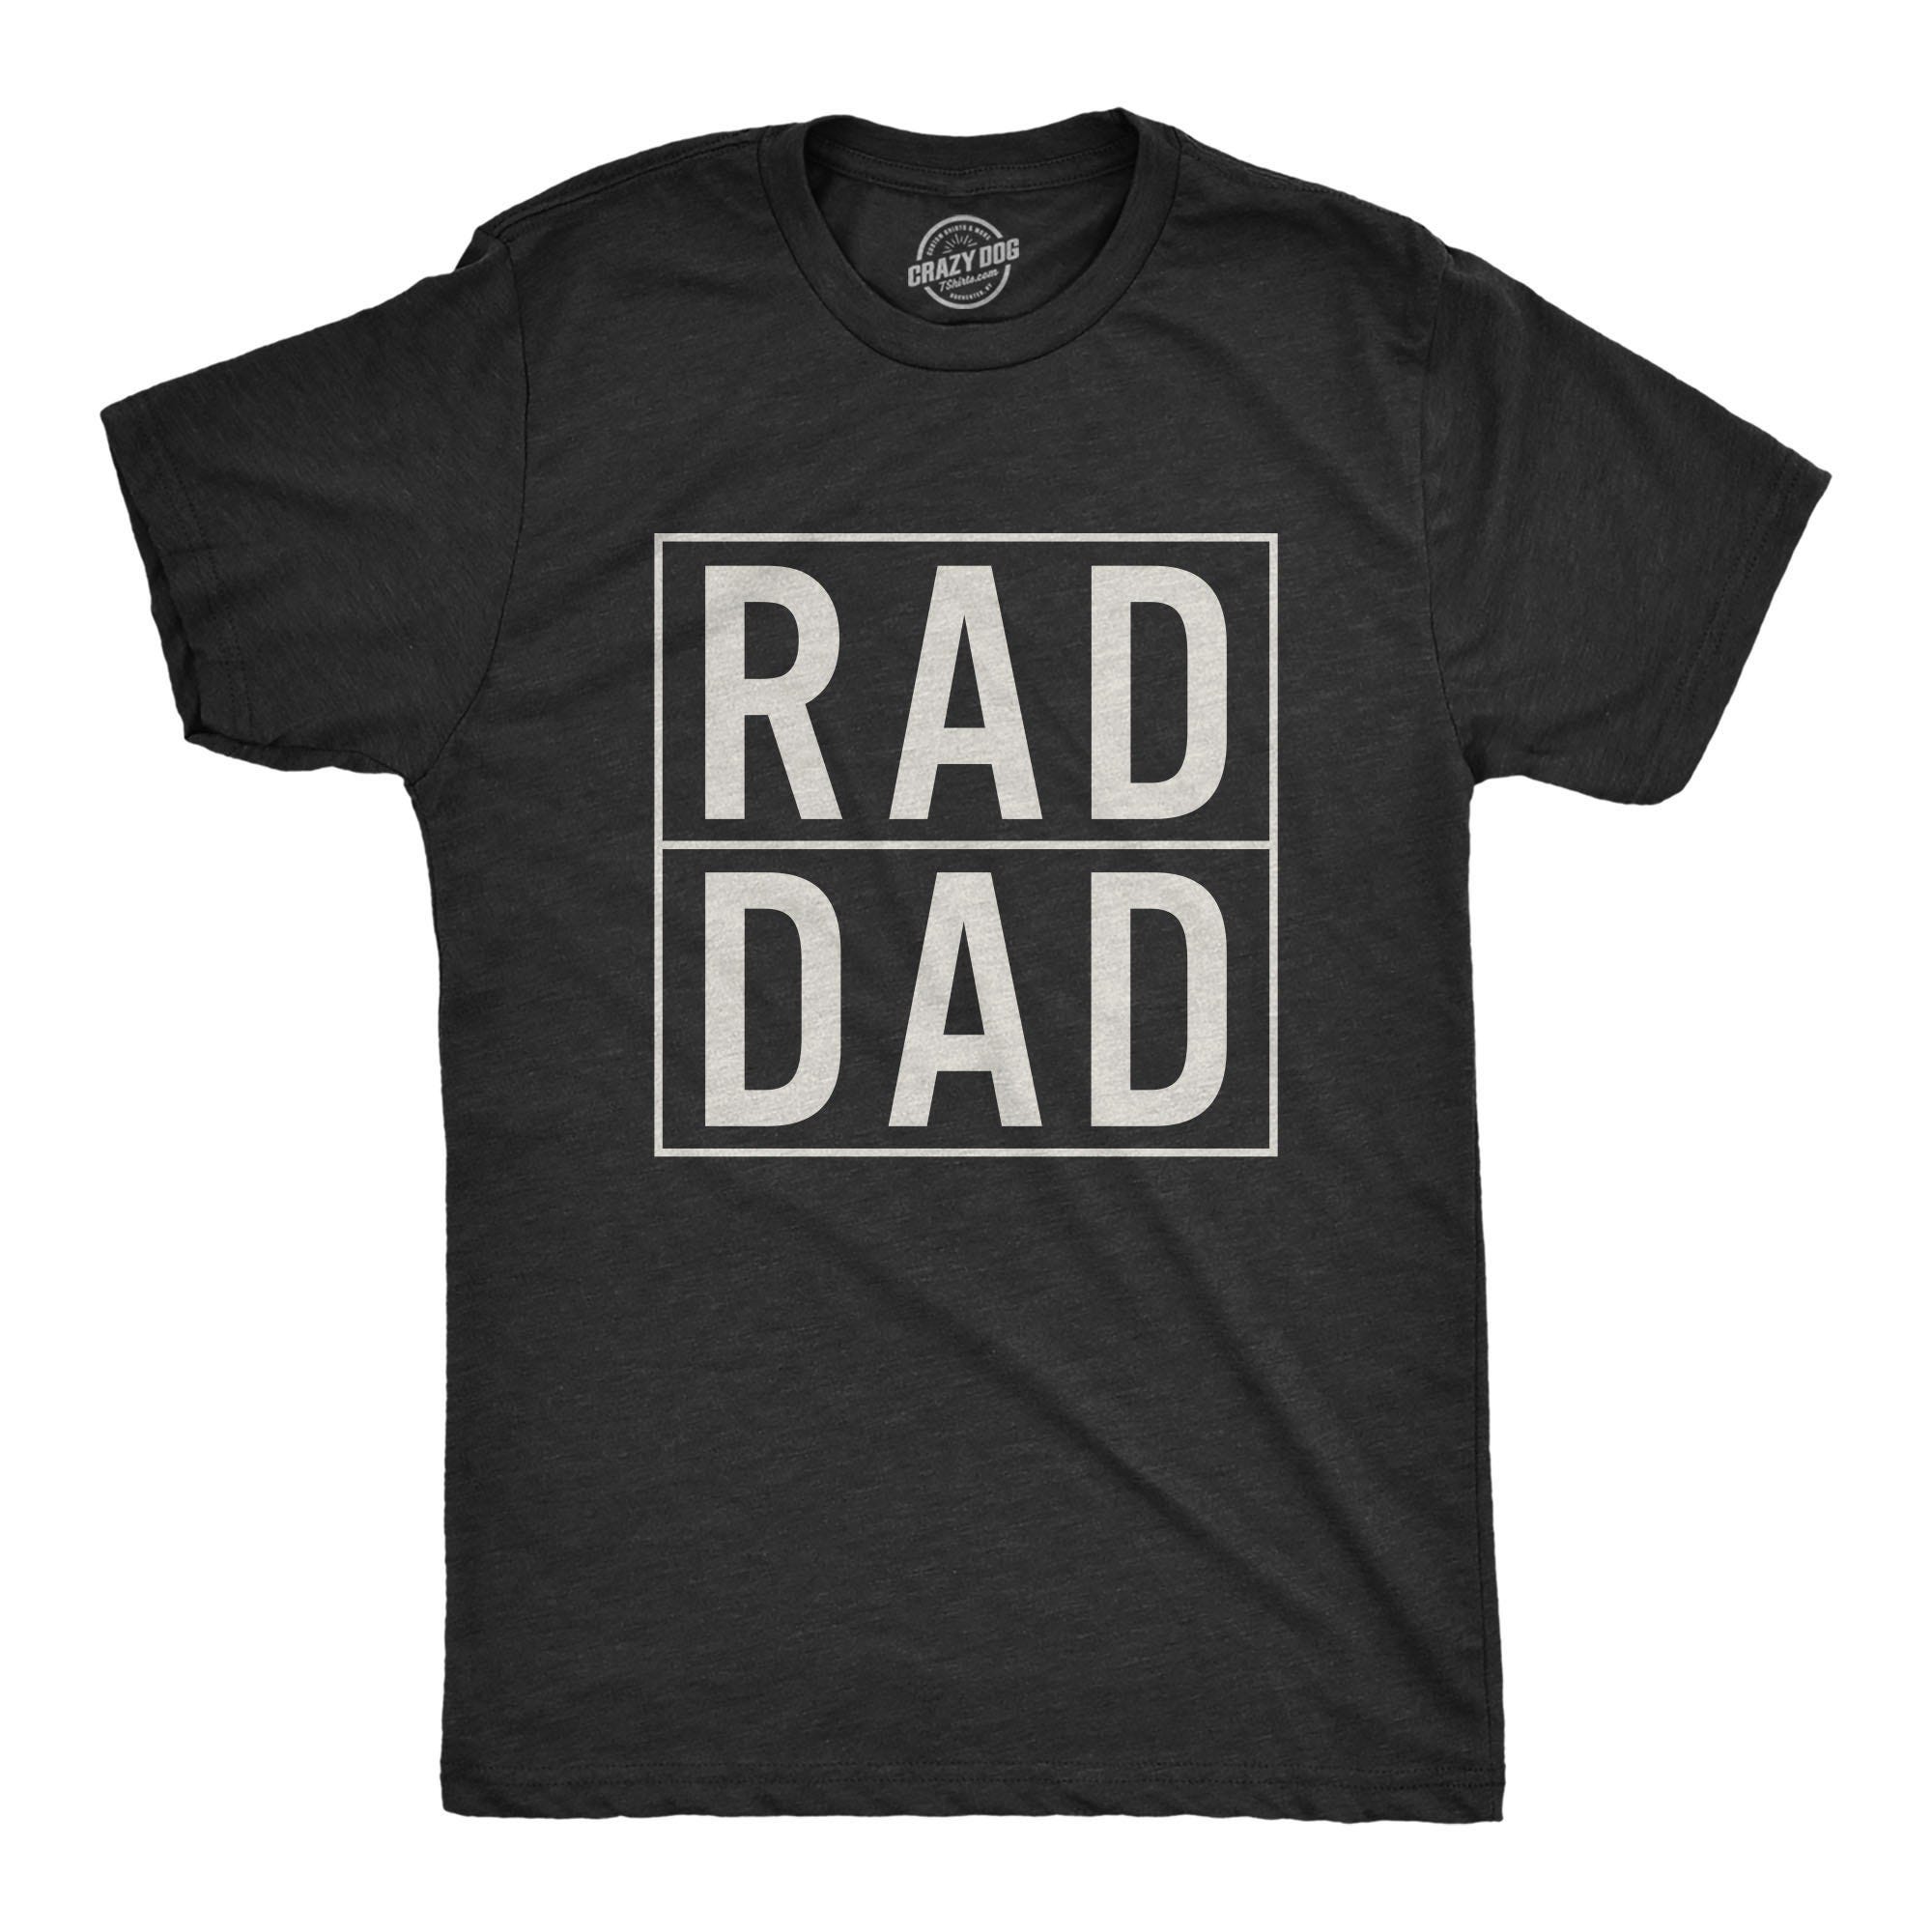 Rad Dad Shirt, Dad Gift Ideas, Fathers Day Gift, Funny Shirt For Dads, Dad Shirt, Dad Shirt, Funny Dad Shirt, Funny Shirts, Best Dad Ever